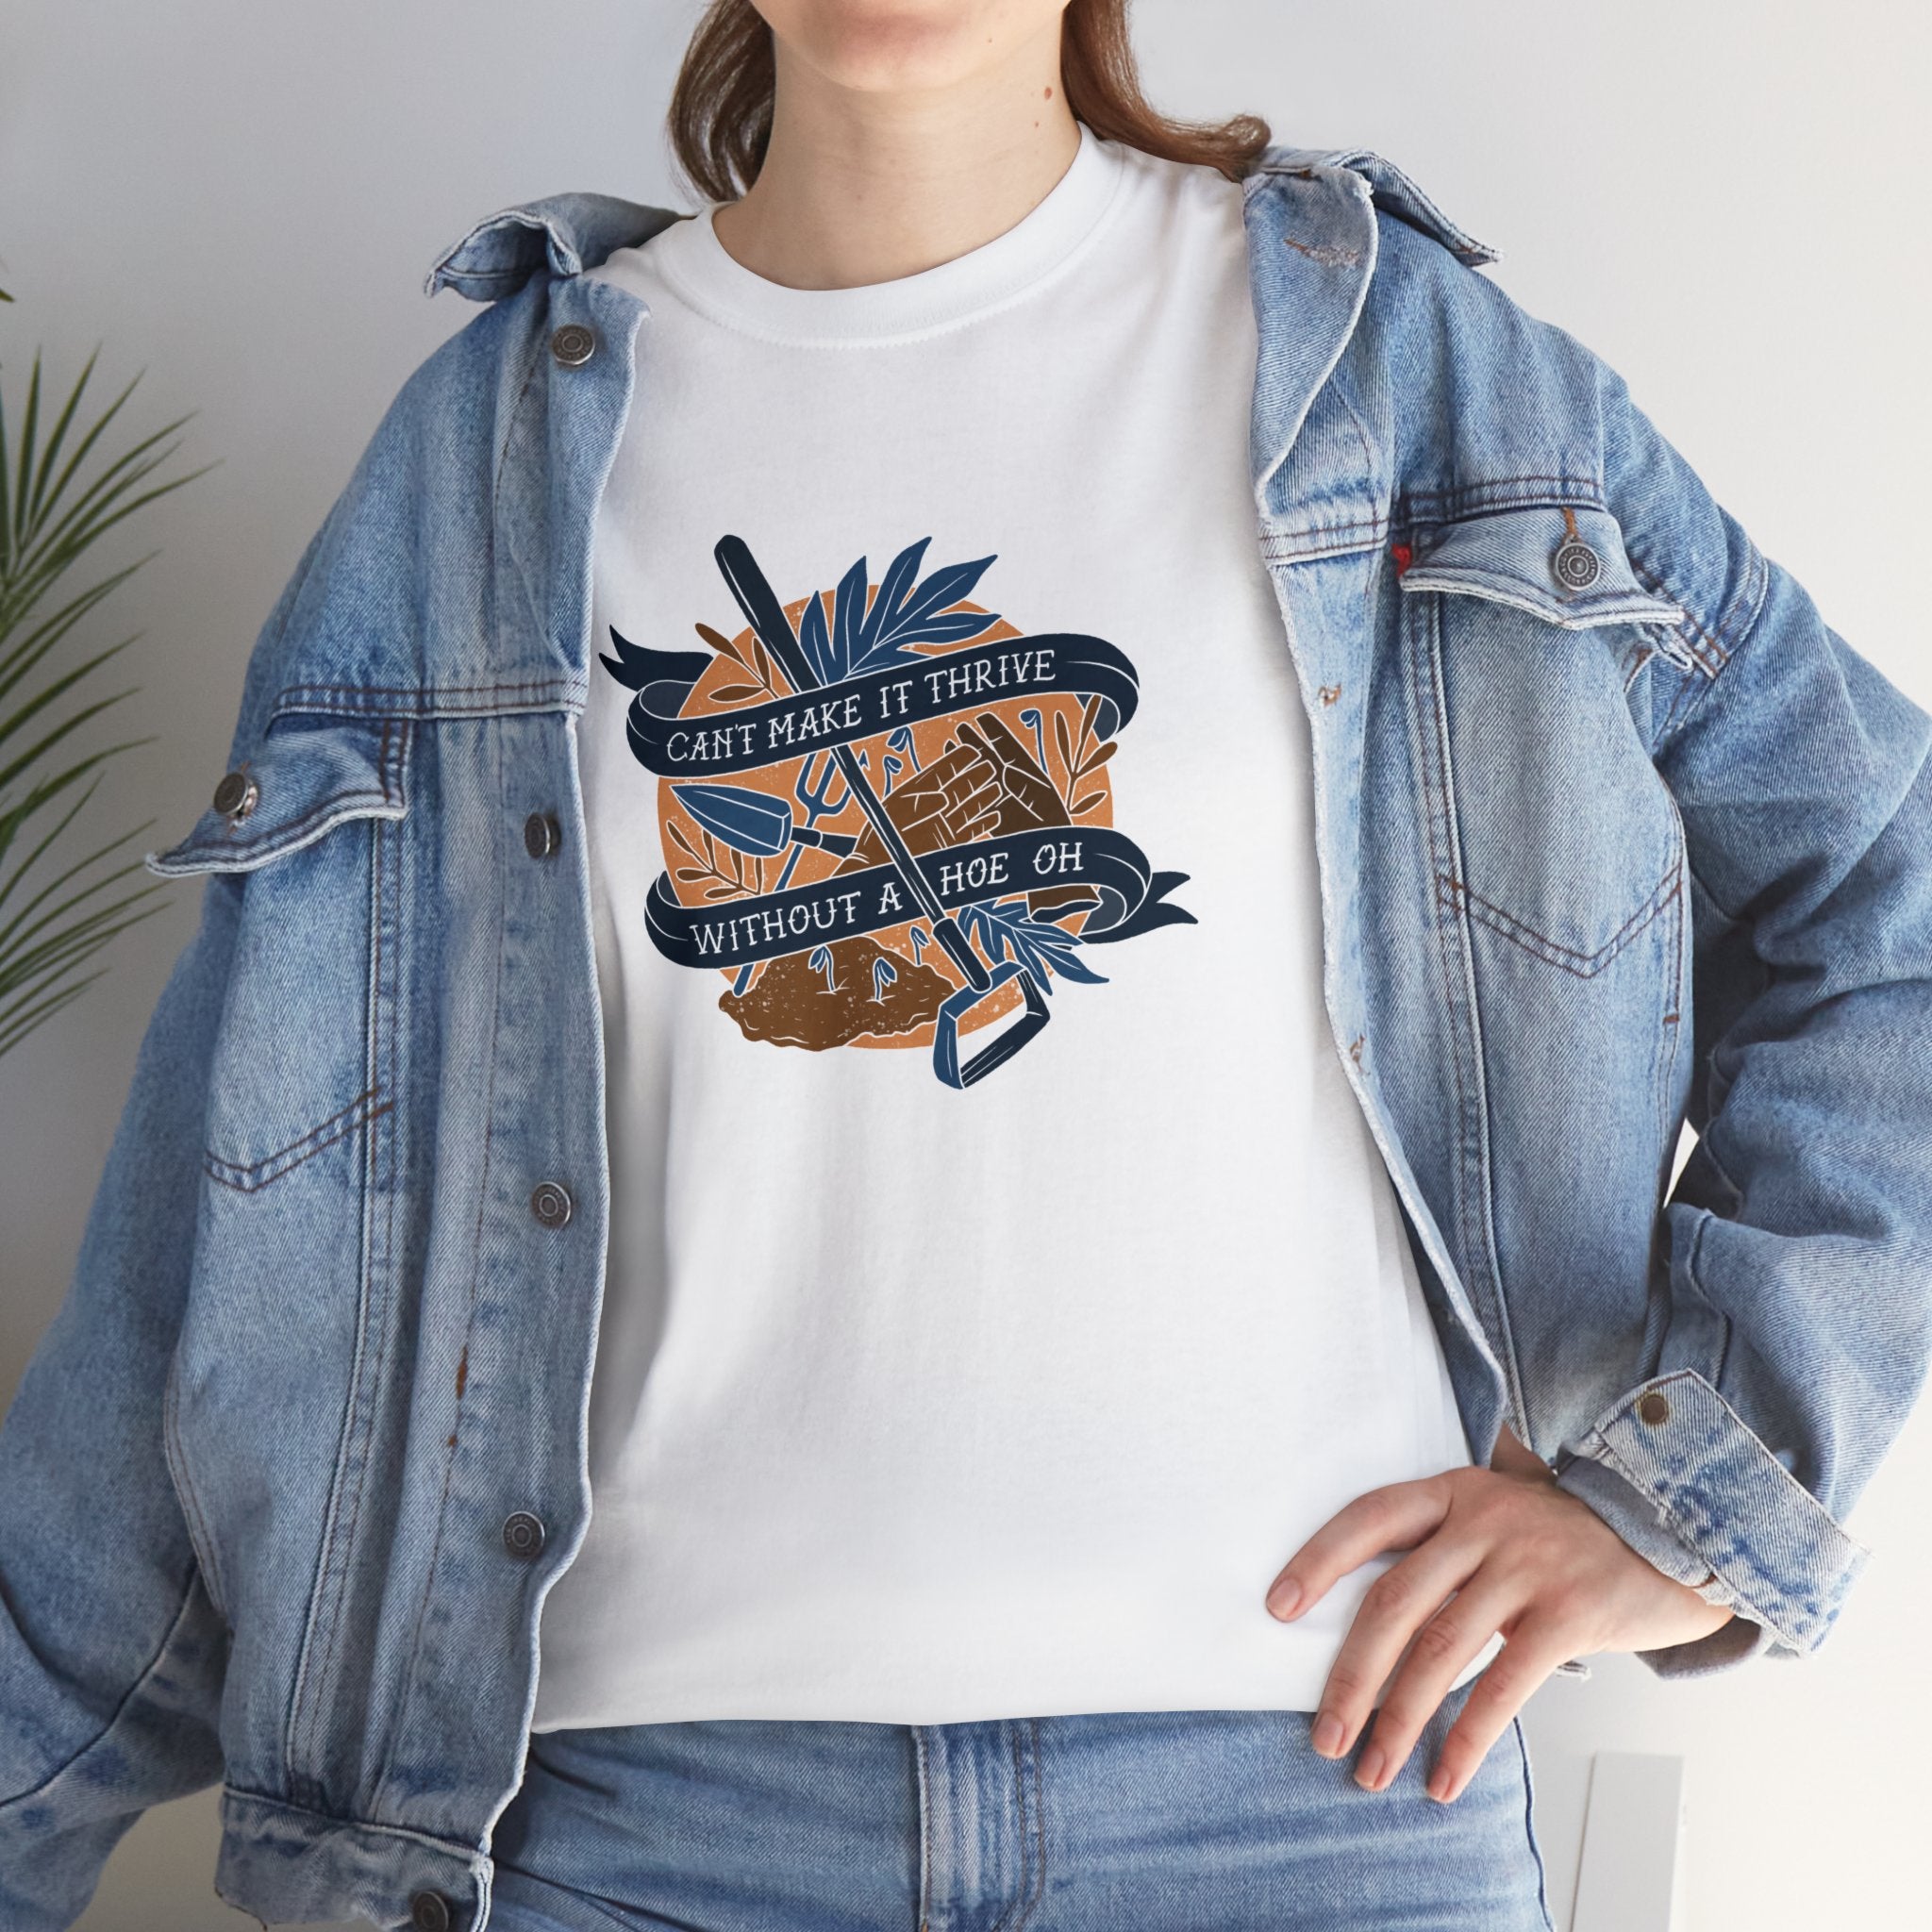 Can't Make it Thrive Without a Hoe T-shirt blue/brown